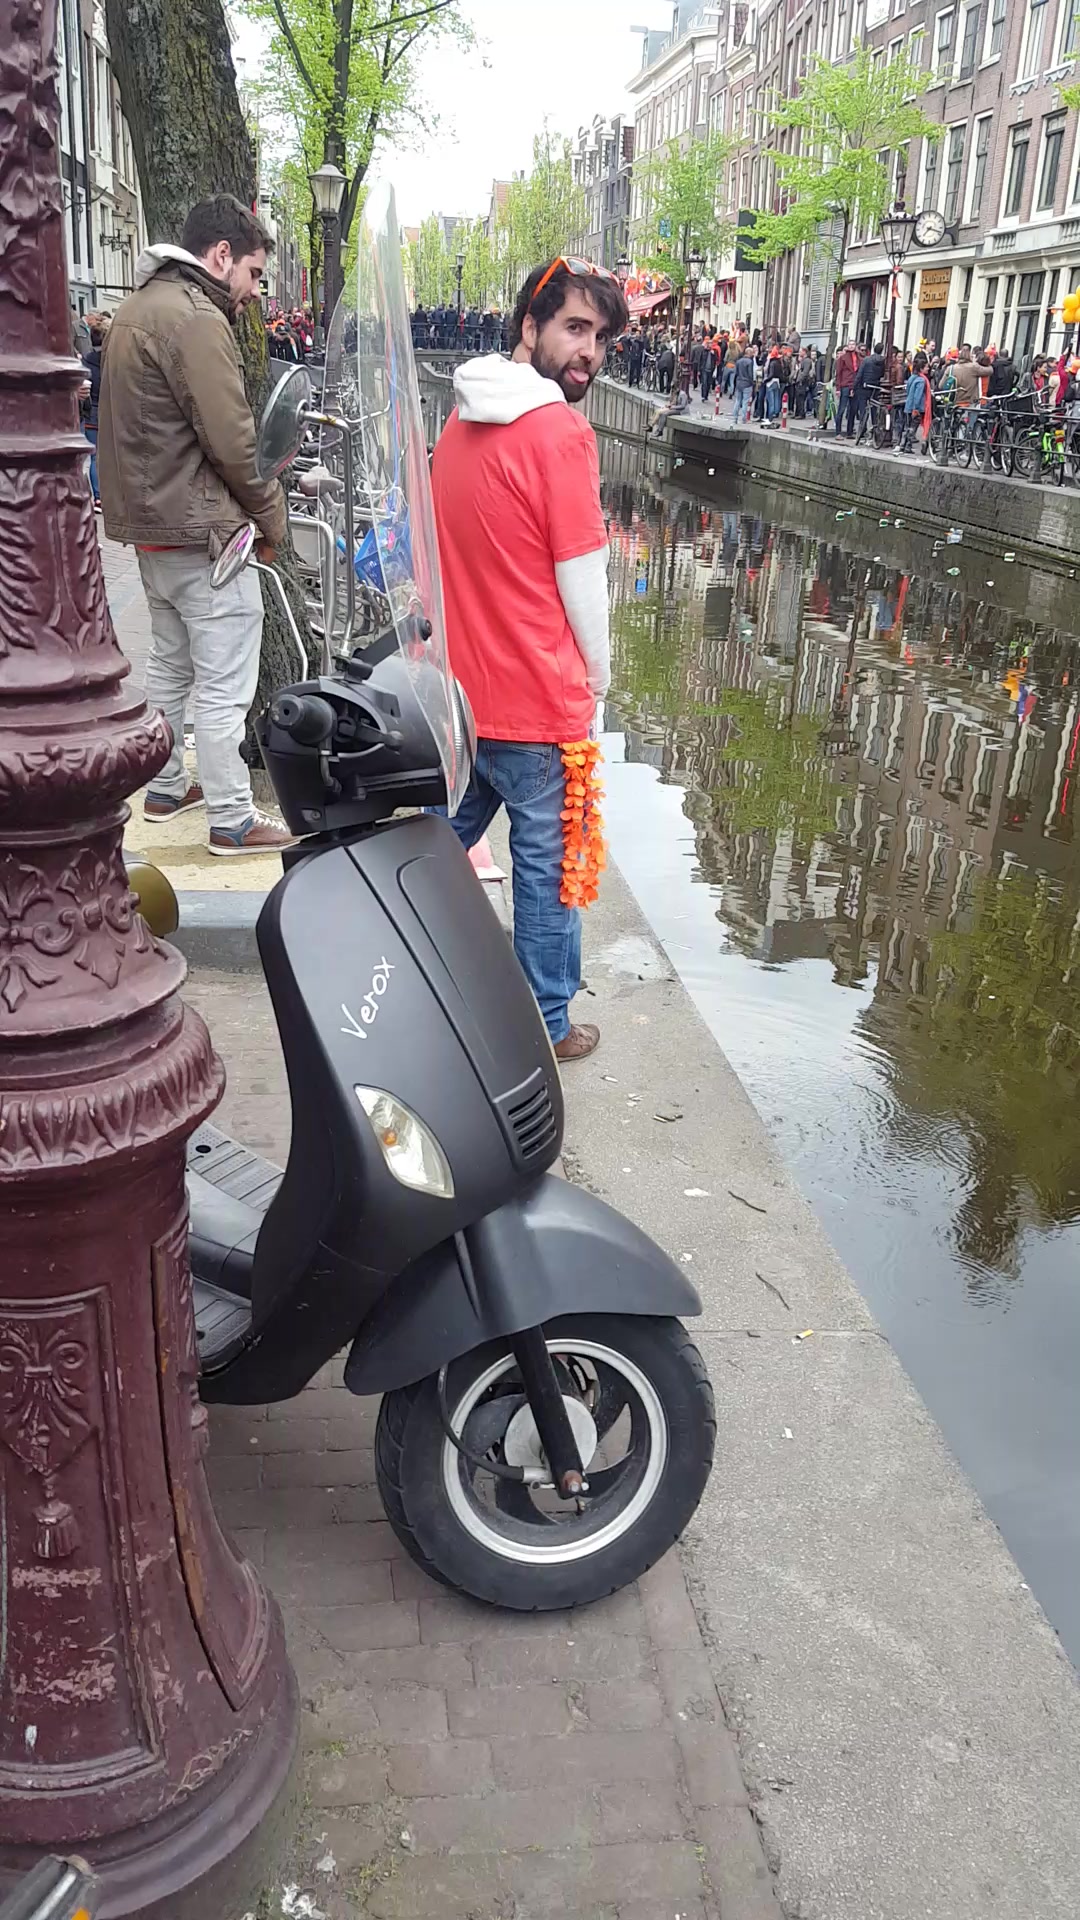 Straight guys pissing in on the street in Amsterdam